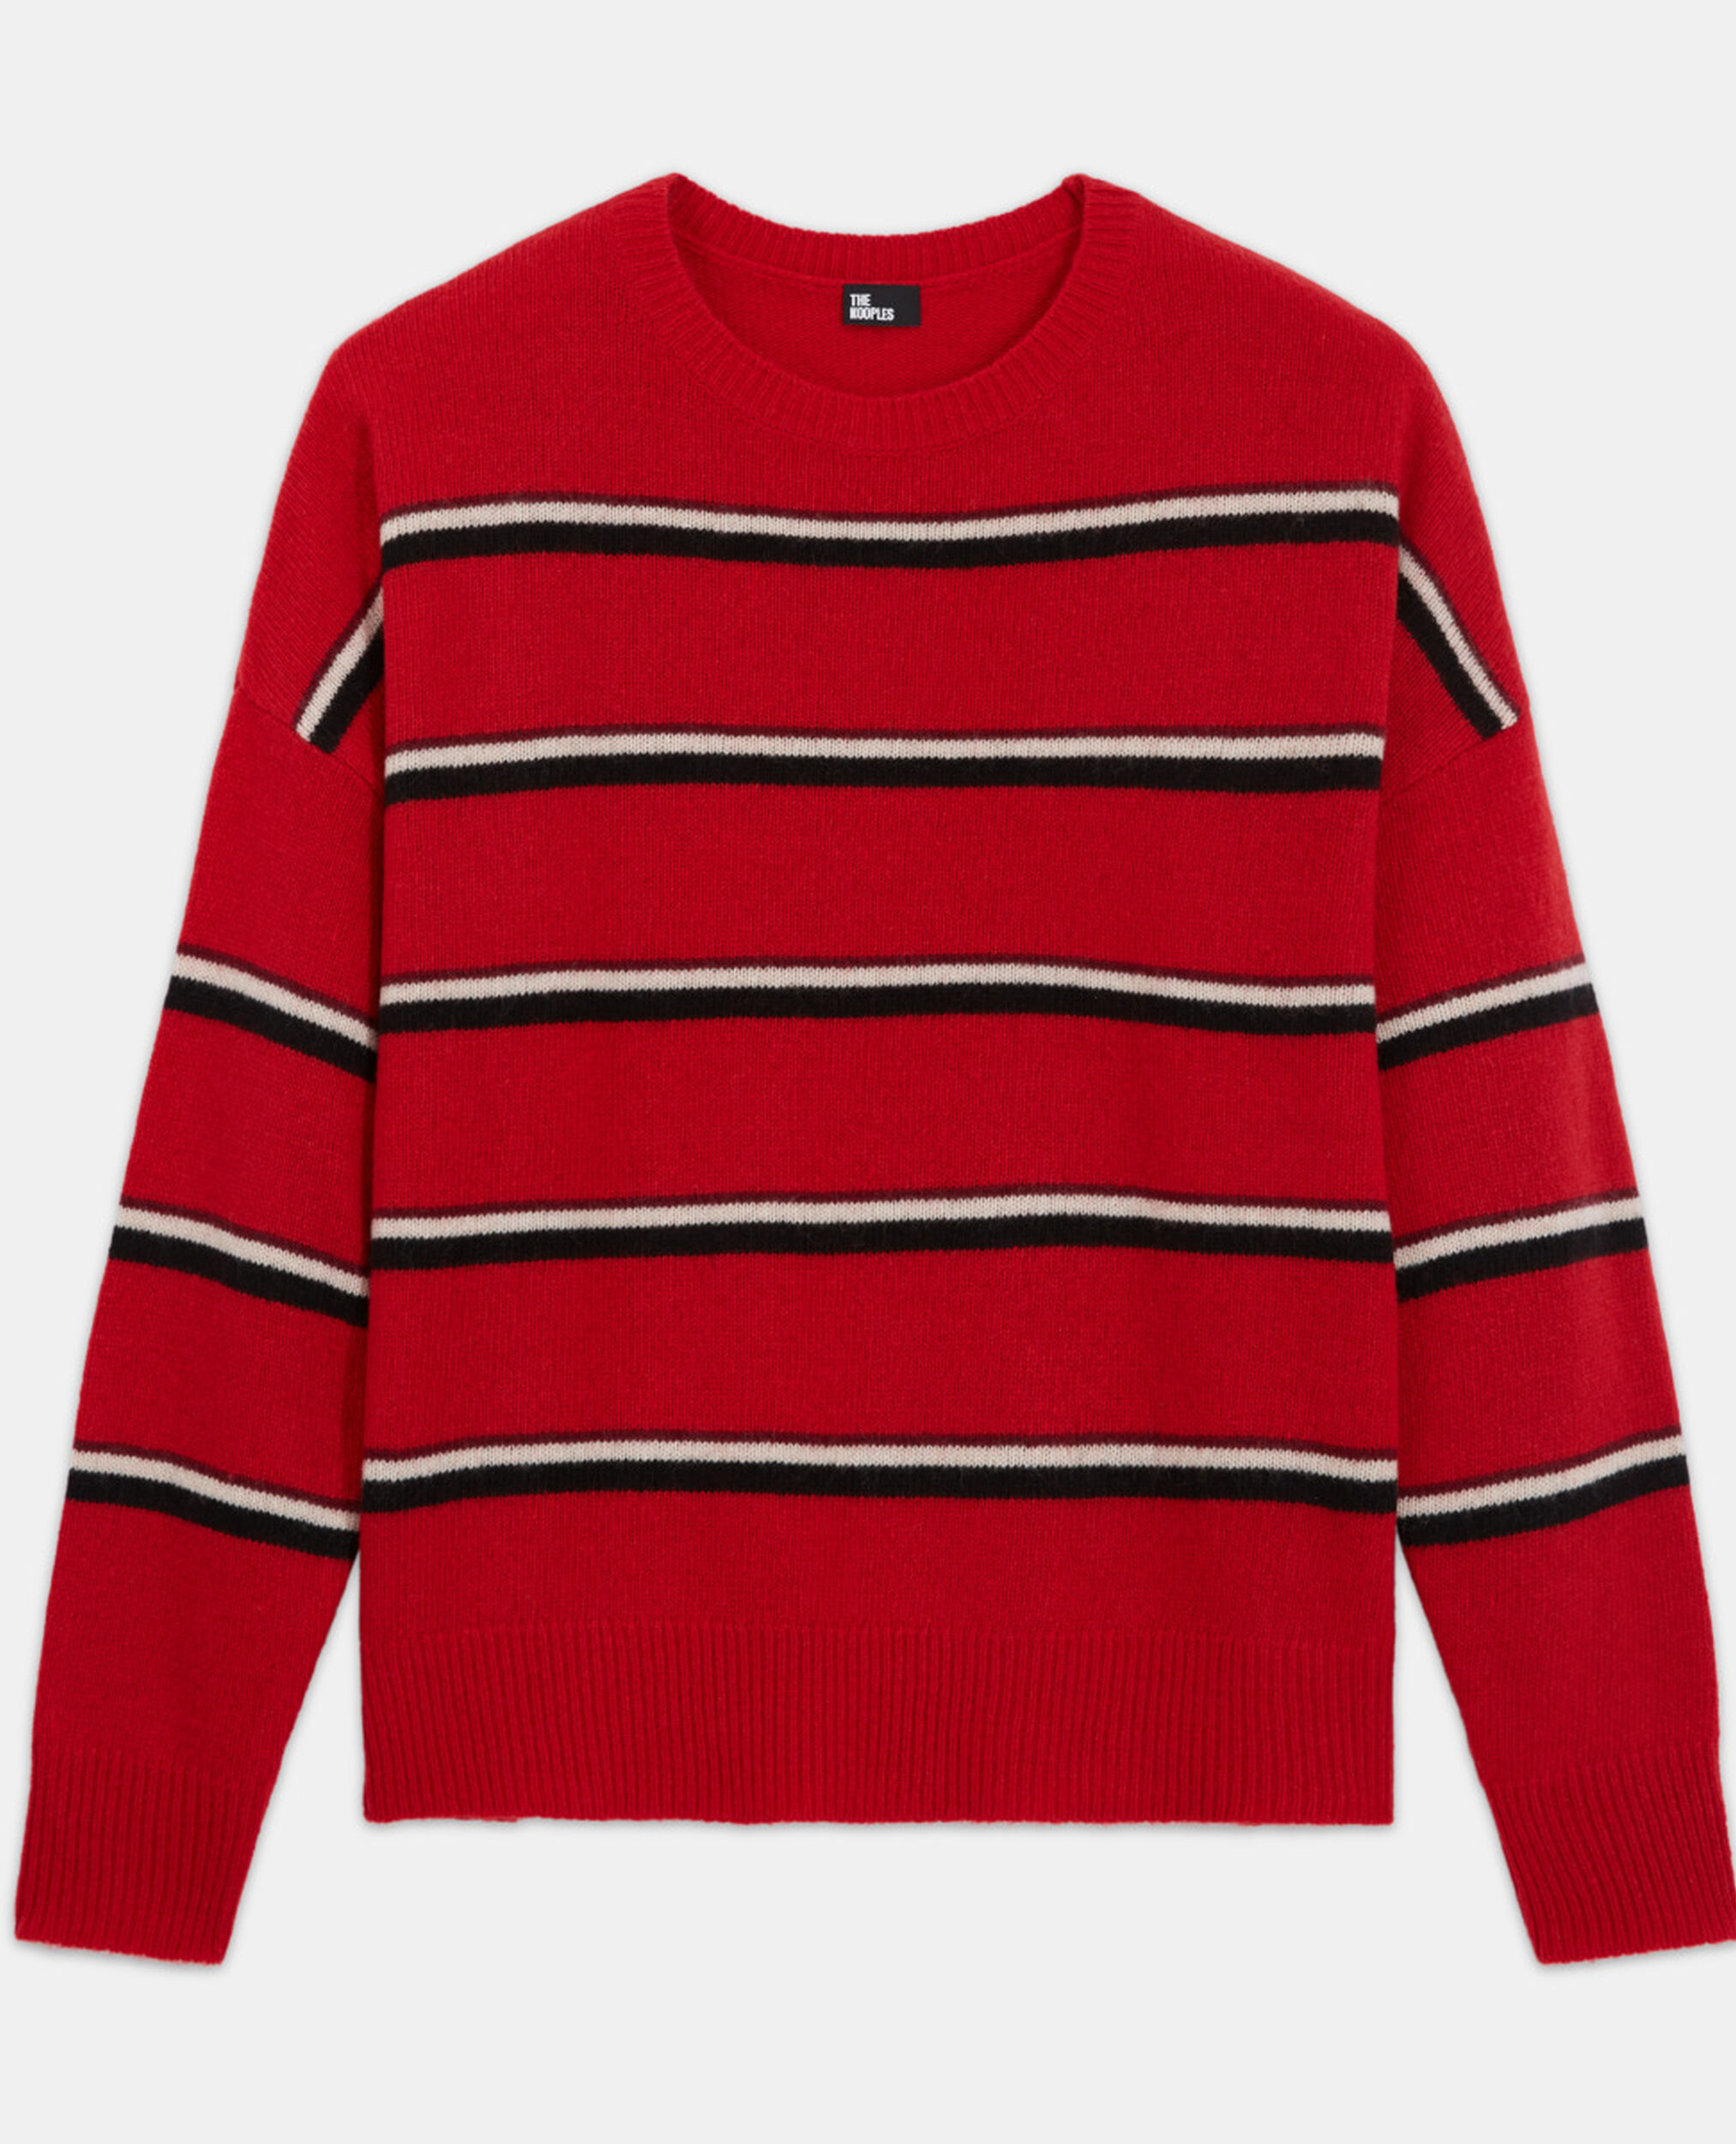 Red cashmere sweater, RED-BLACK-WHITE, hi-res image number null